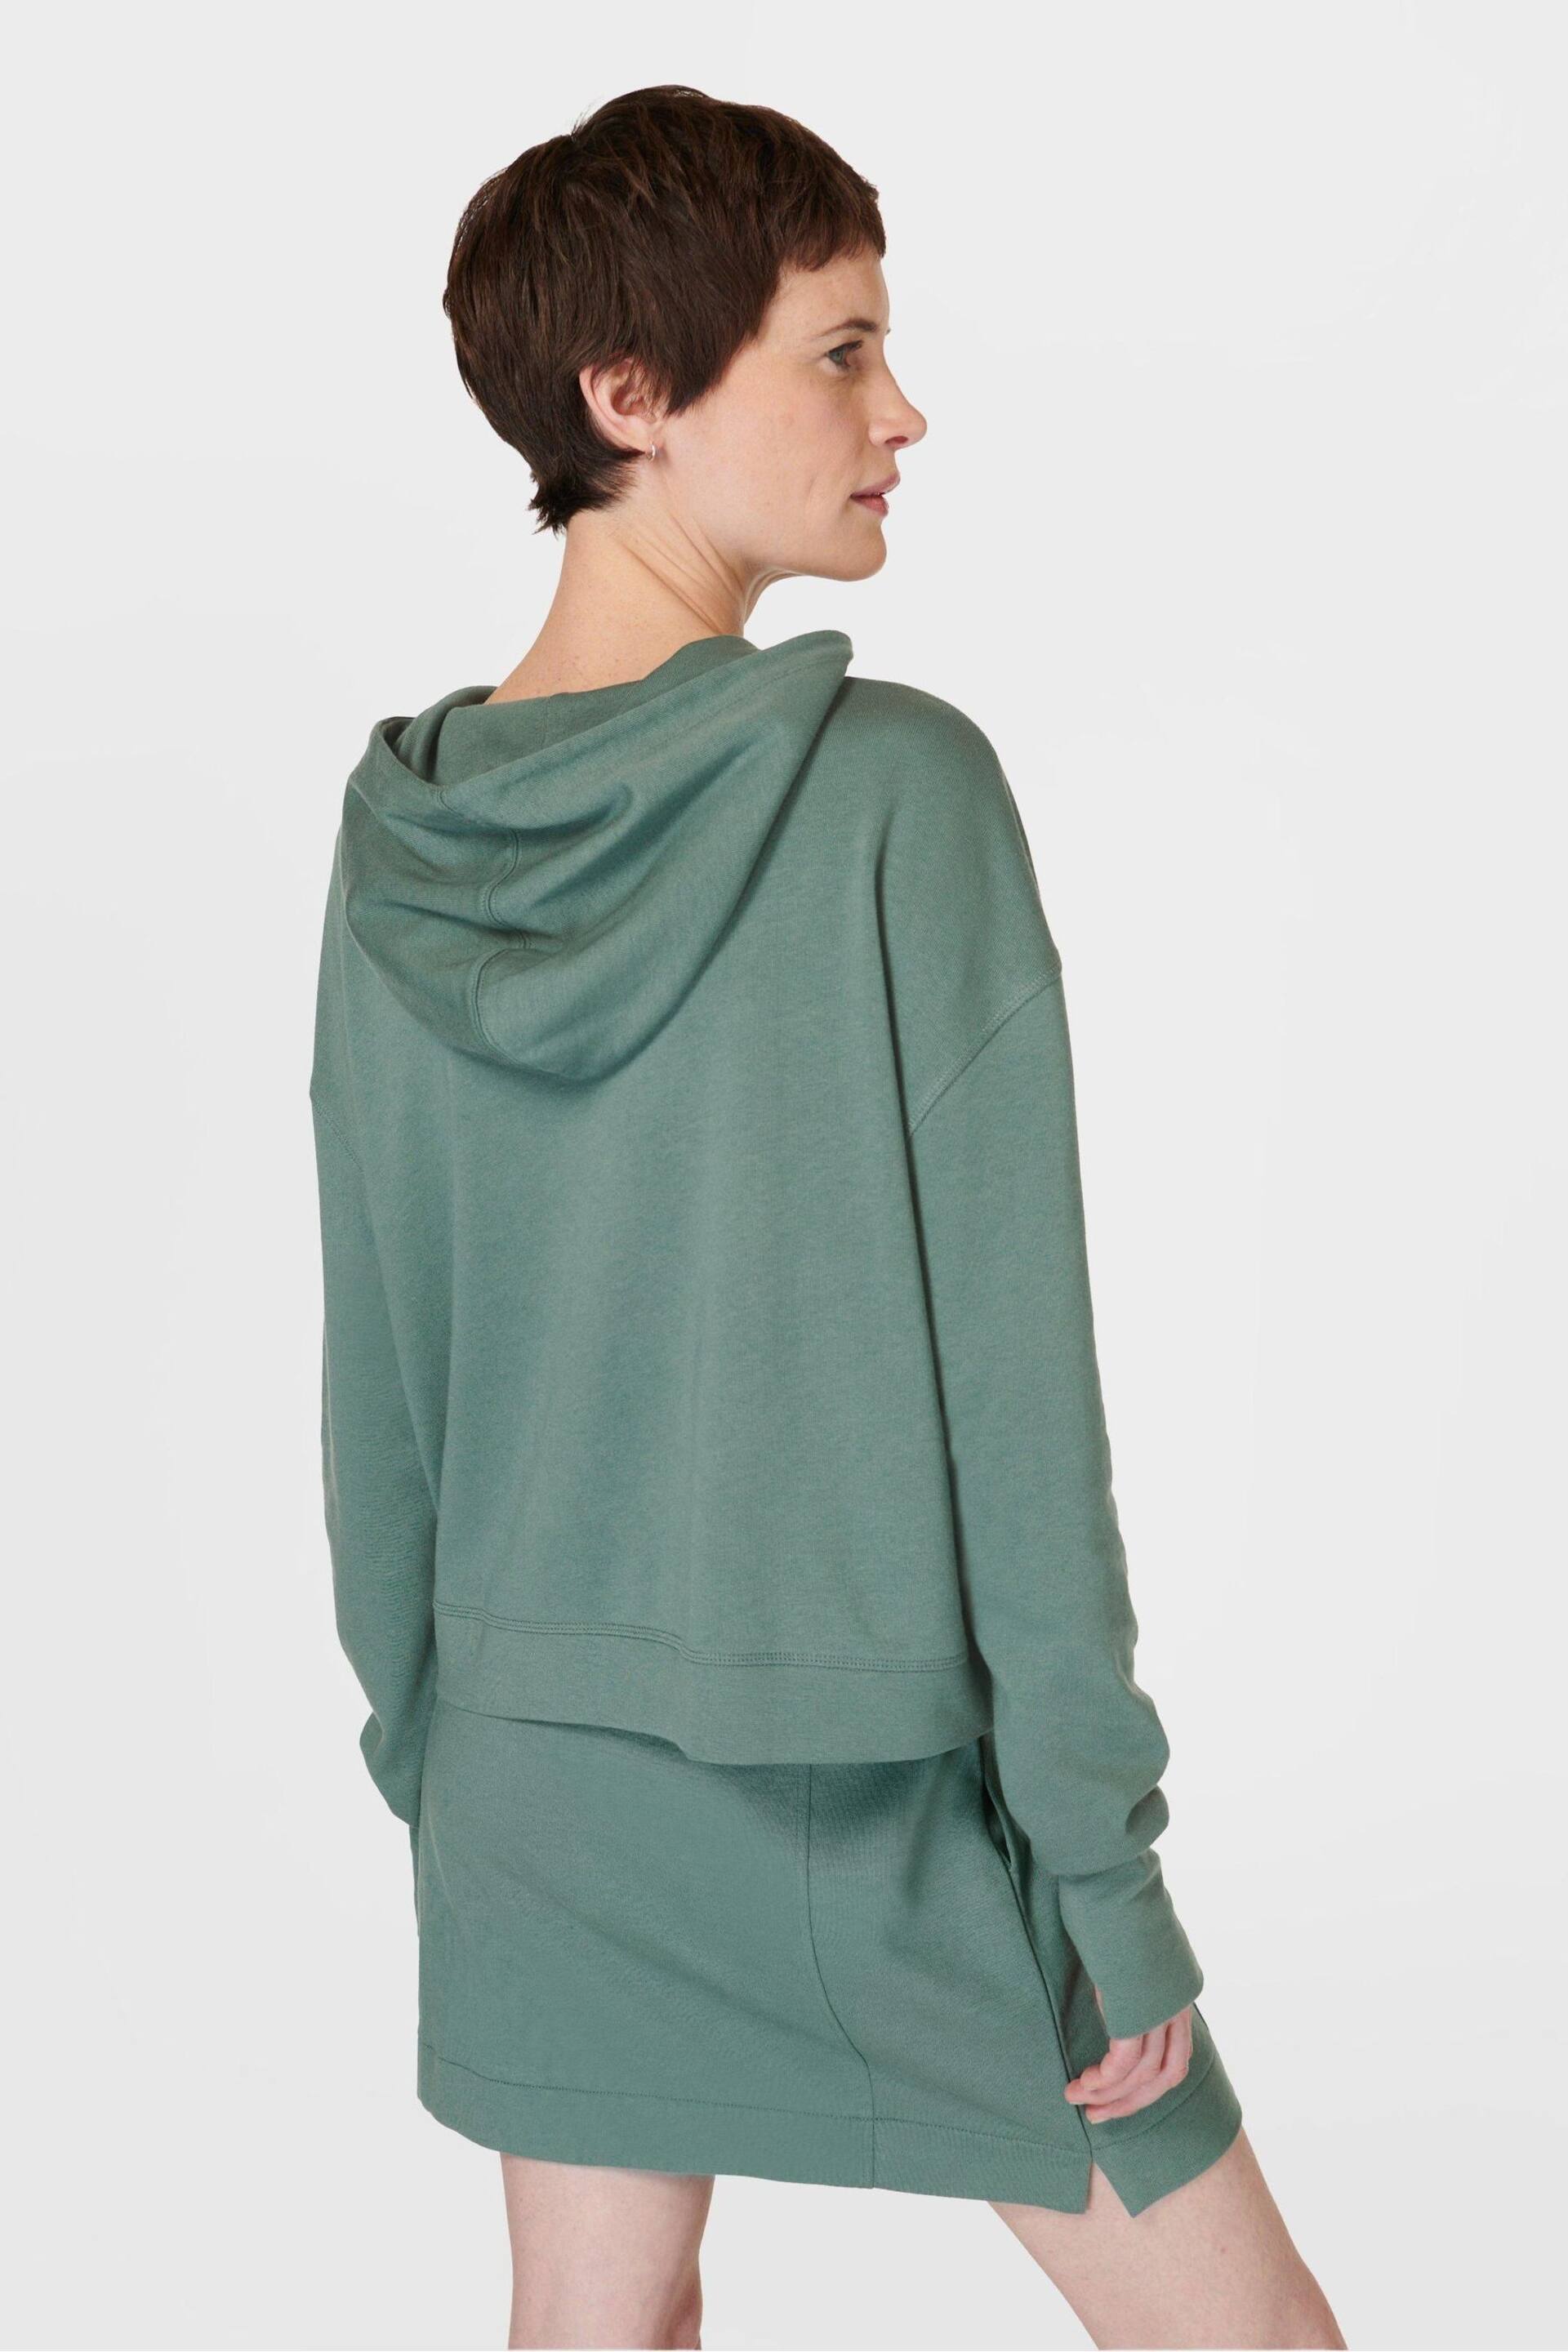 Sweaty Betty Cool Forest Green After Class Hoodie - Image 5 of 7